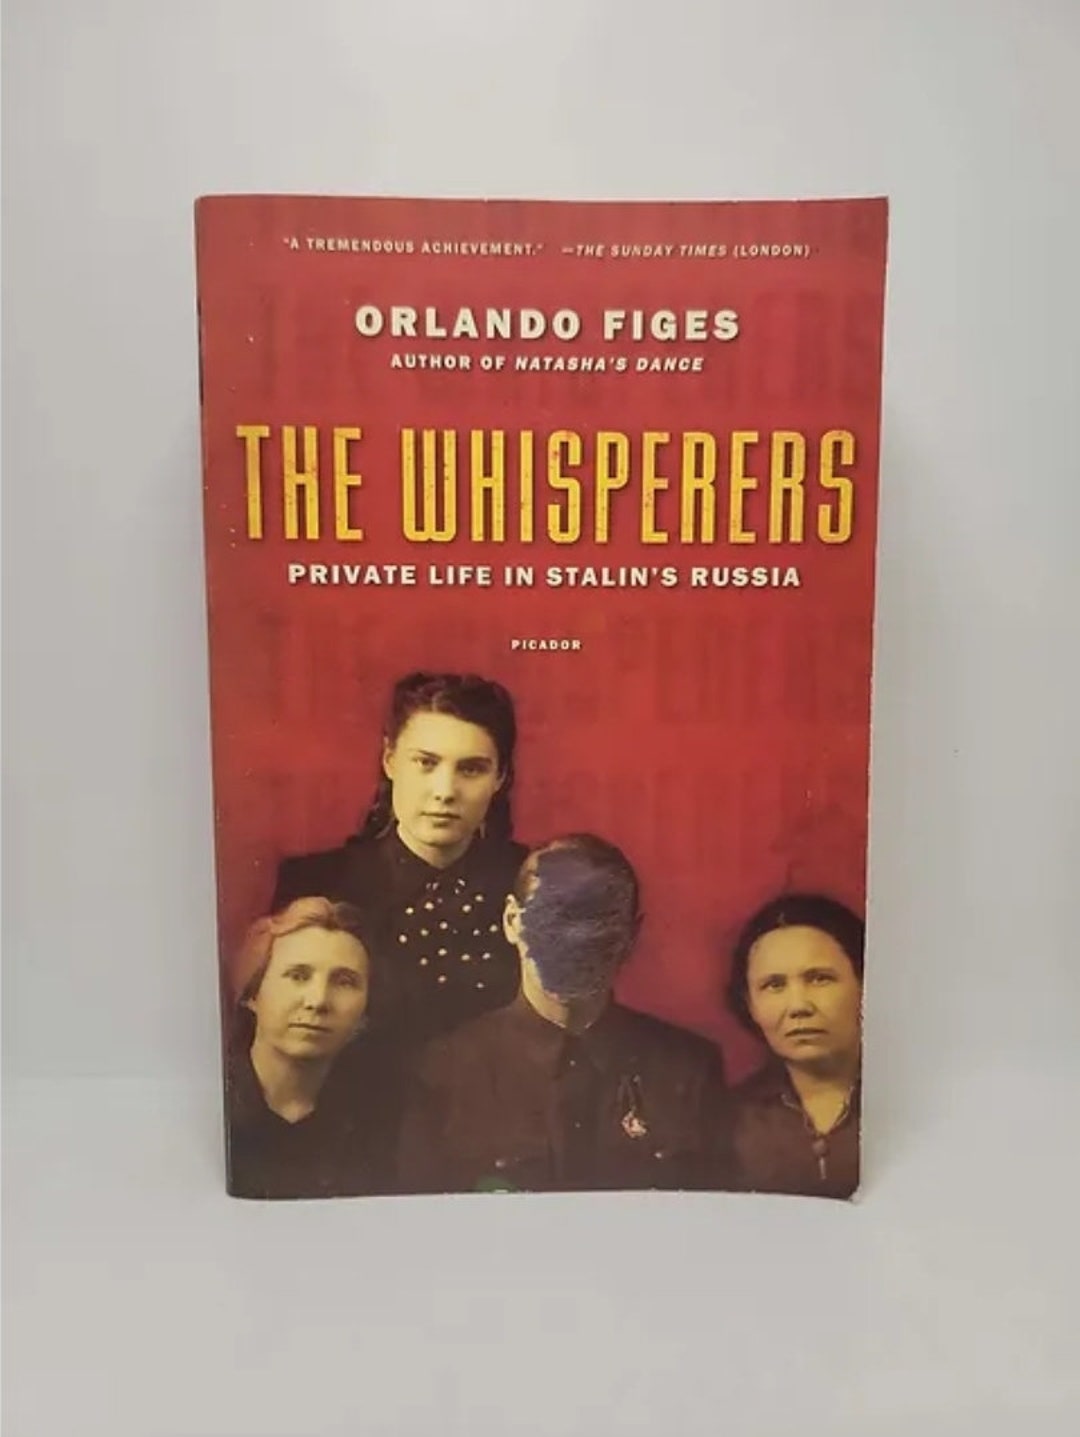 The Whisperers Private Life In Stalins Russia Paperback November 25